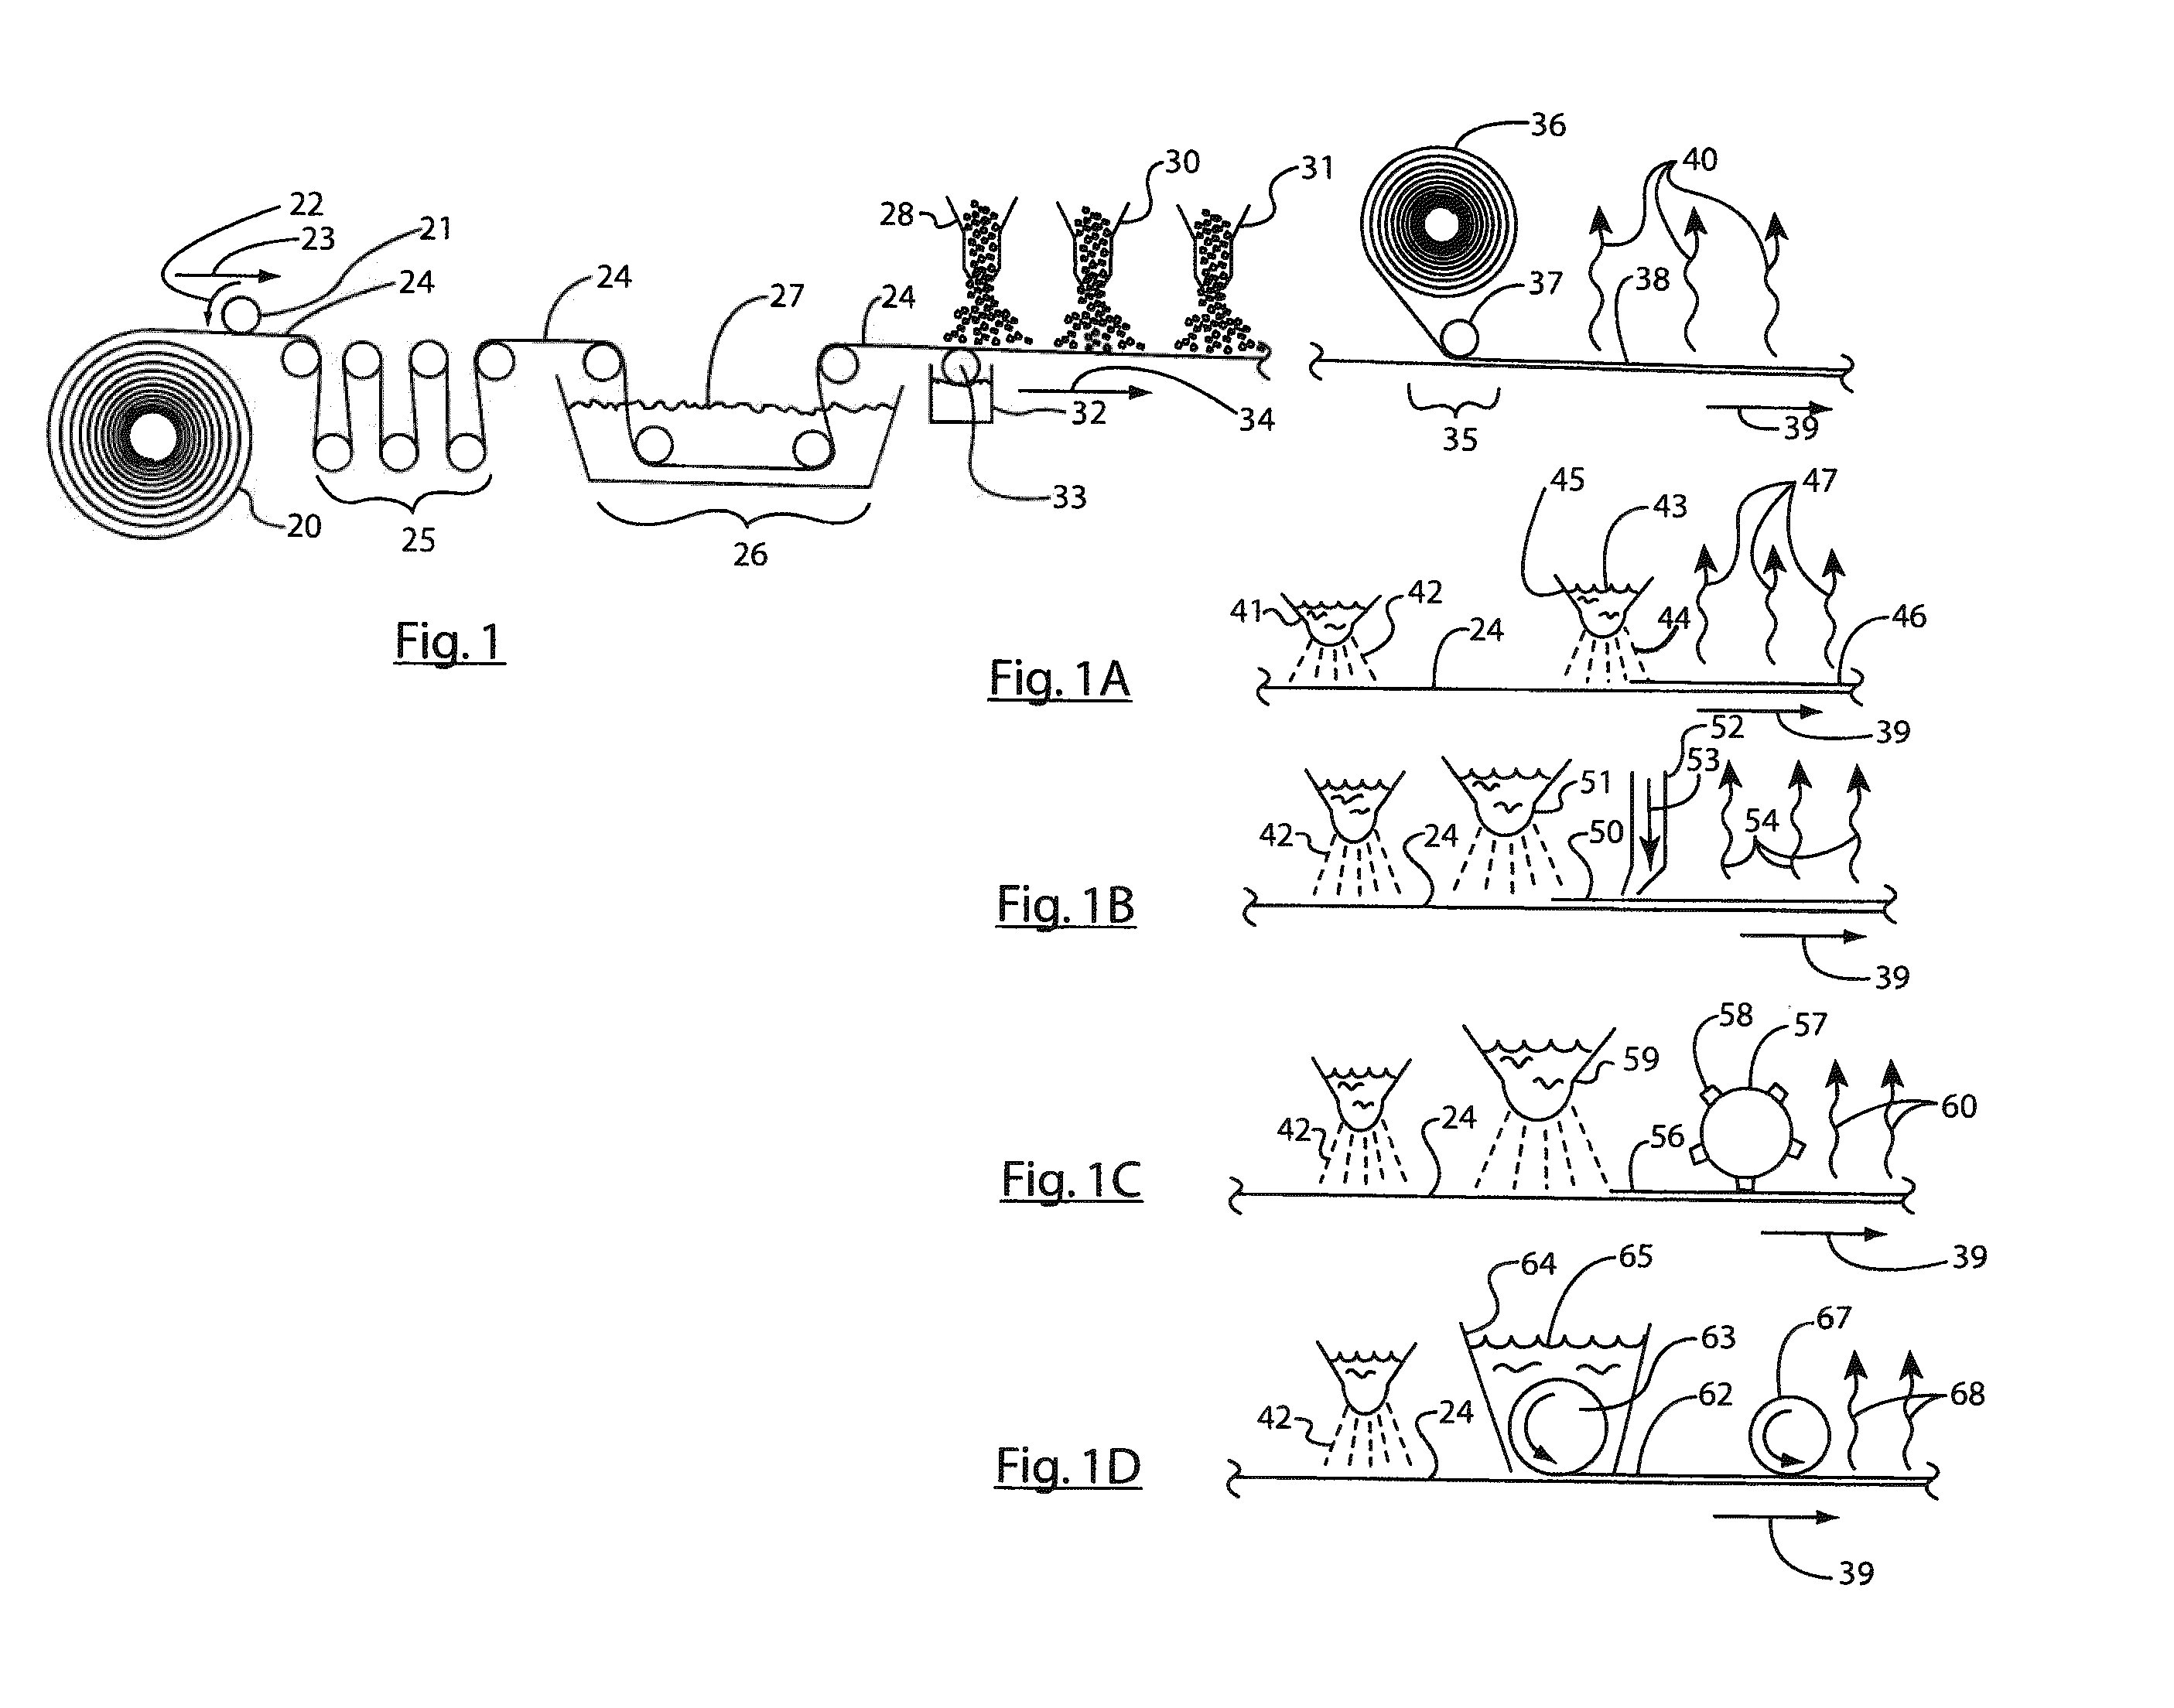 Roof Covering Material and Method of Manufacturing